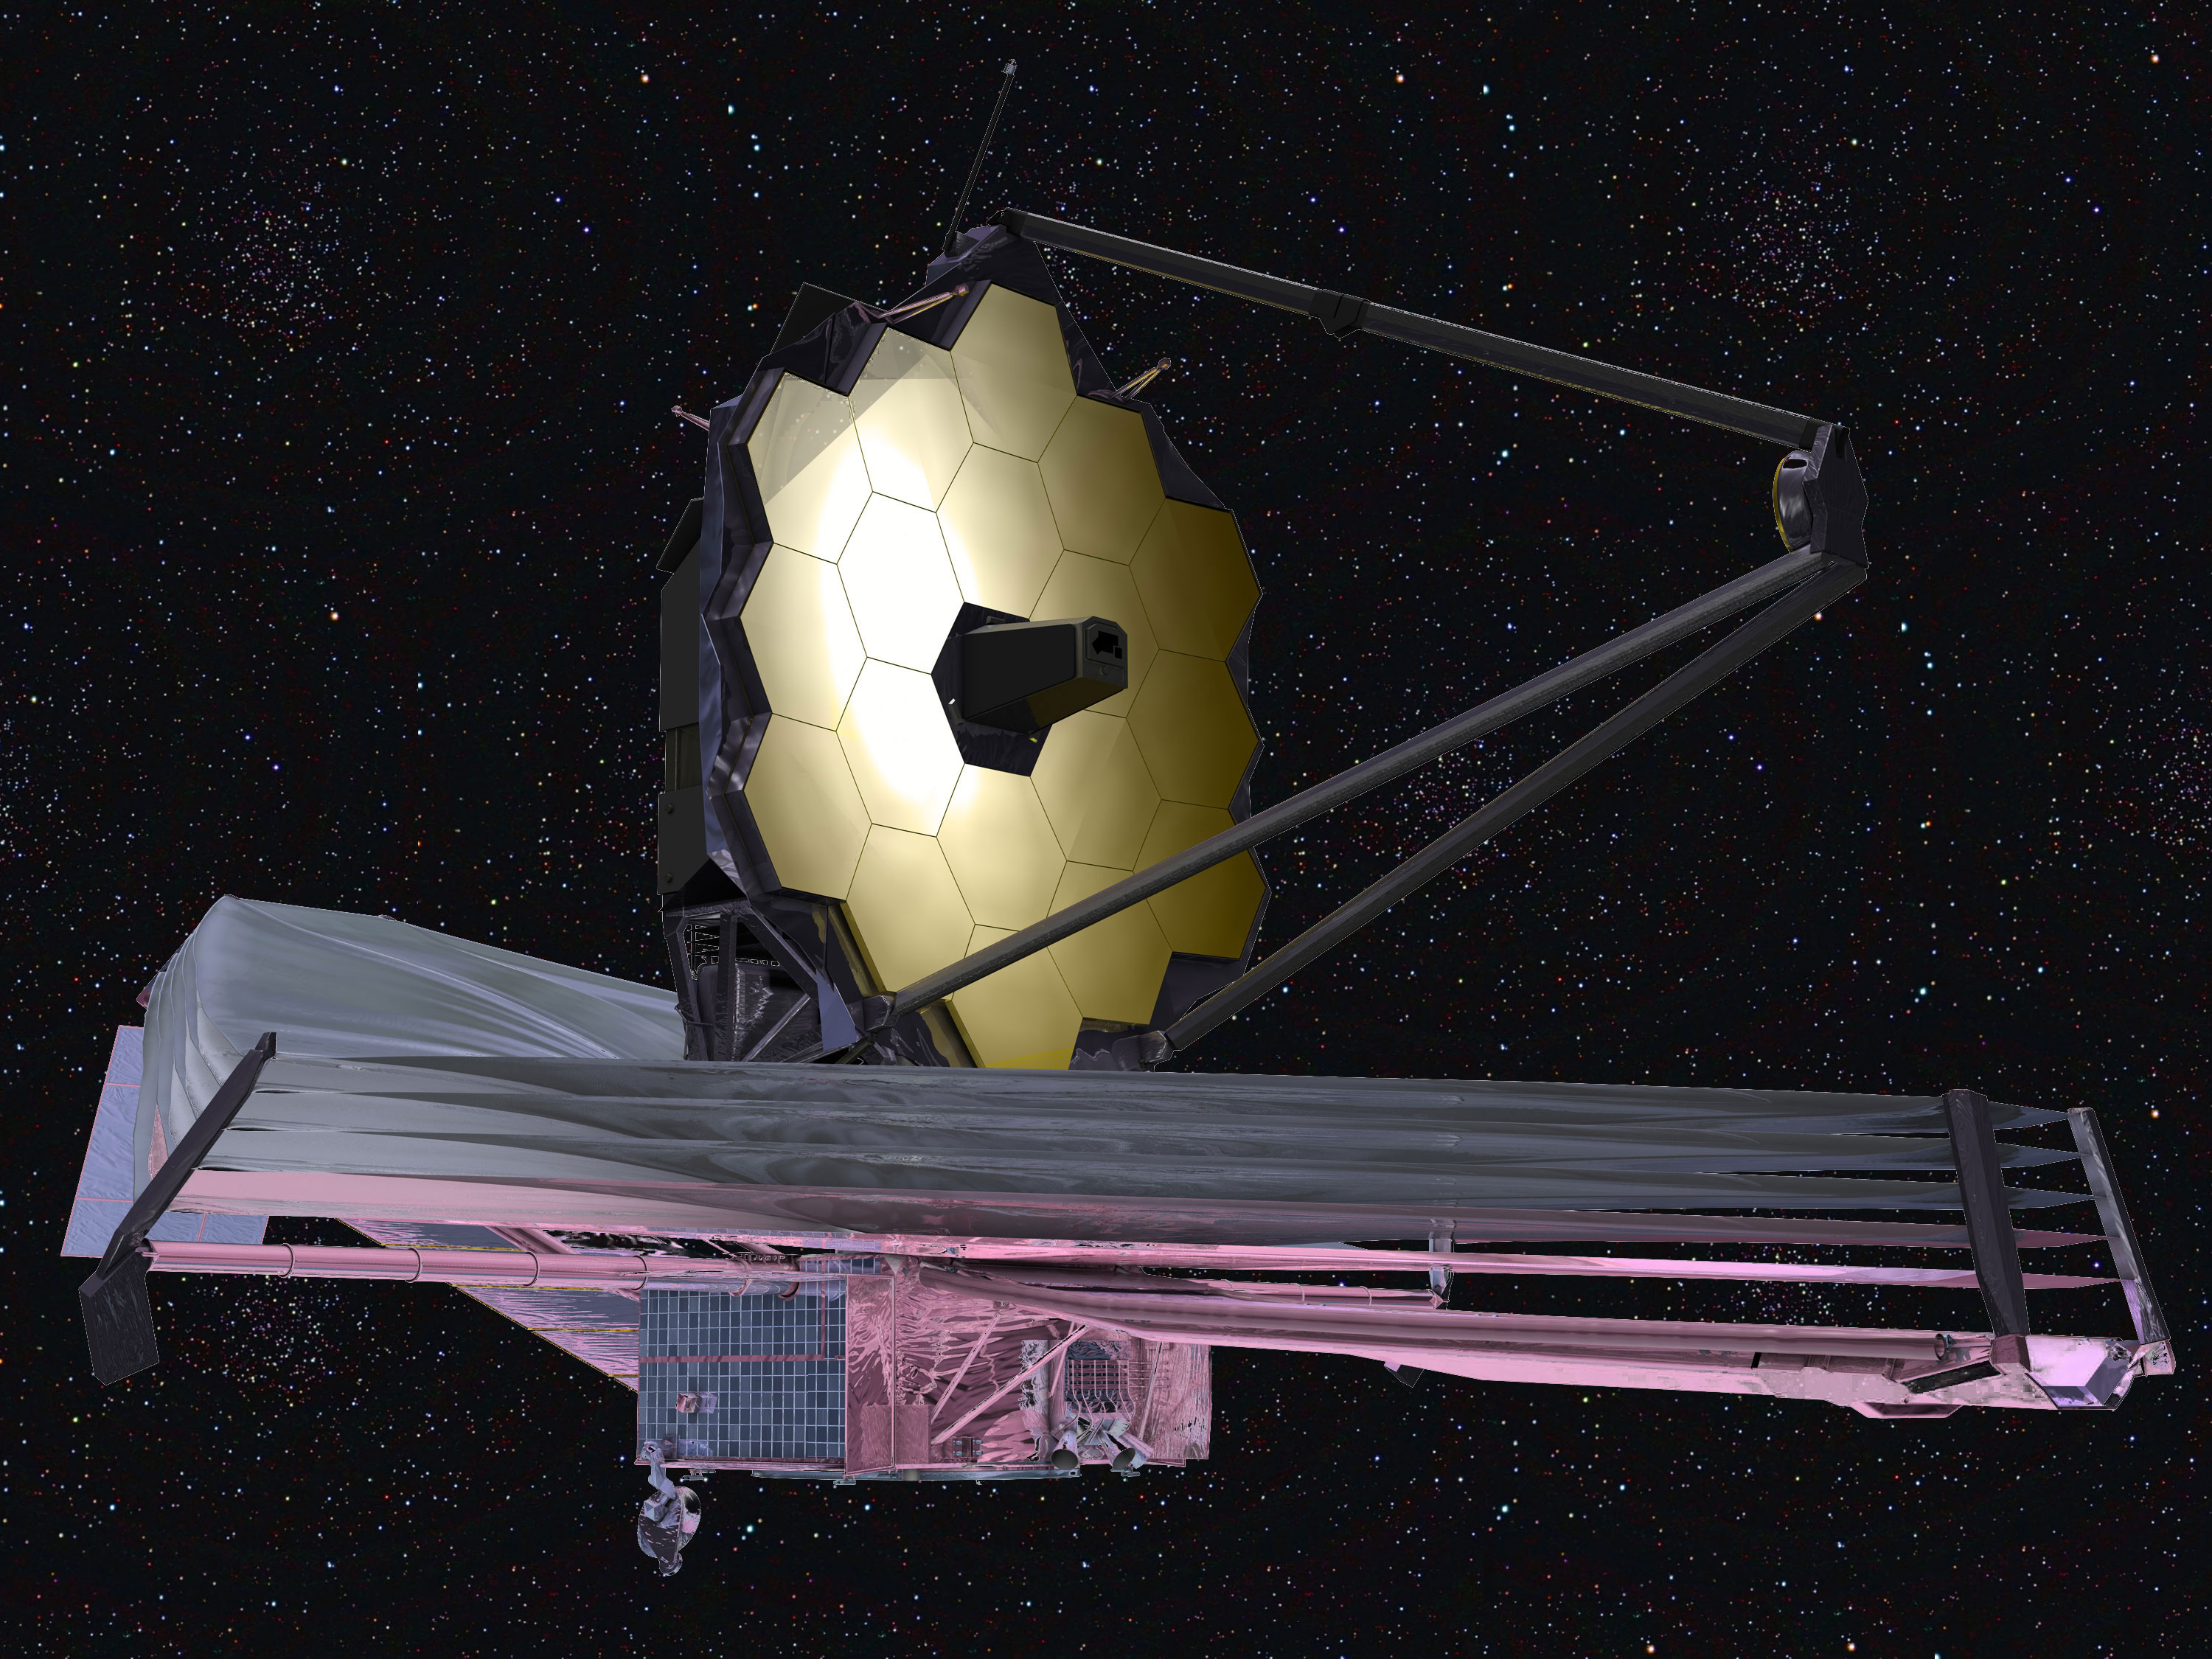 james webb space telescope images planets